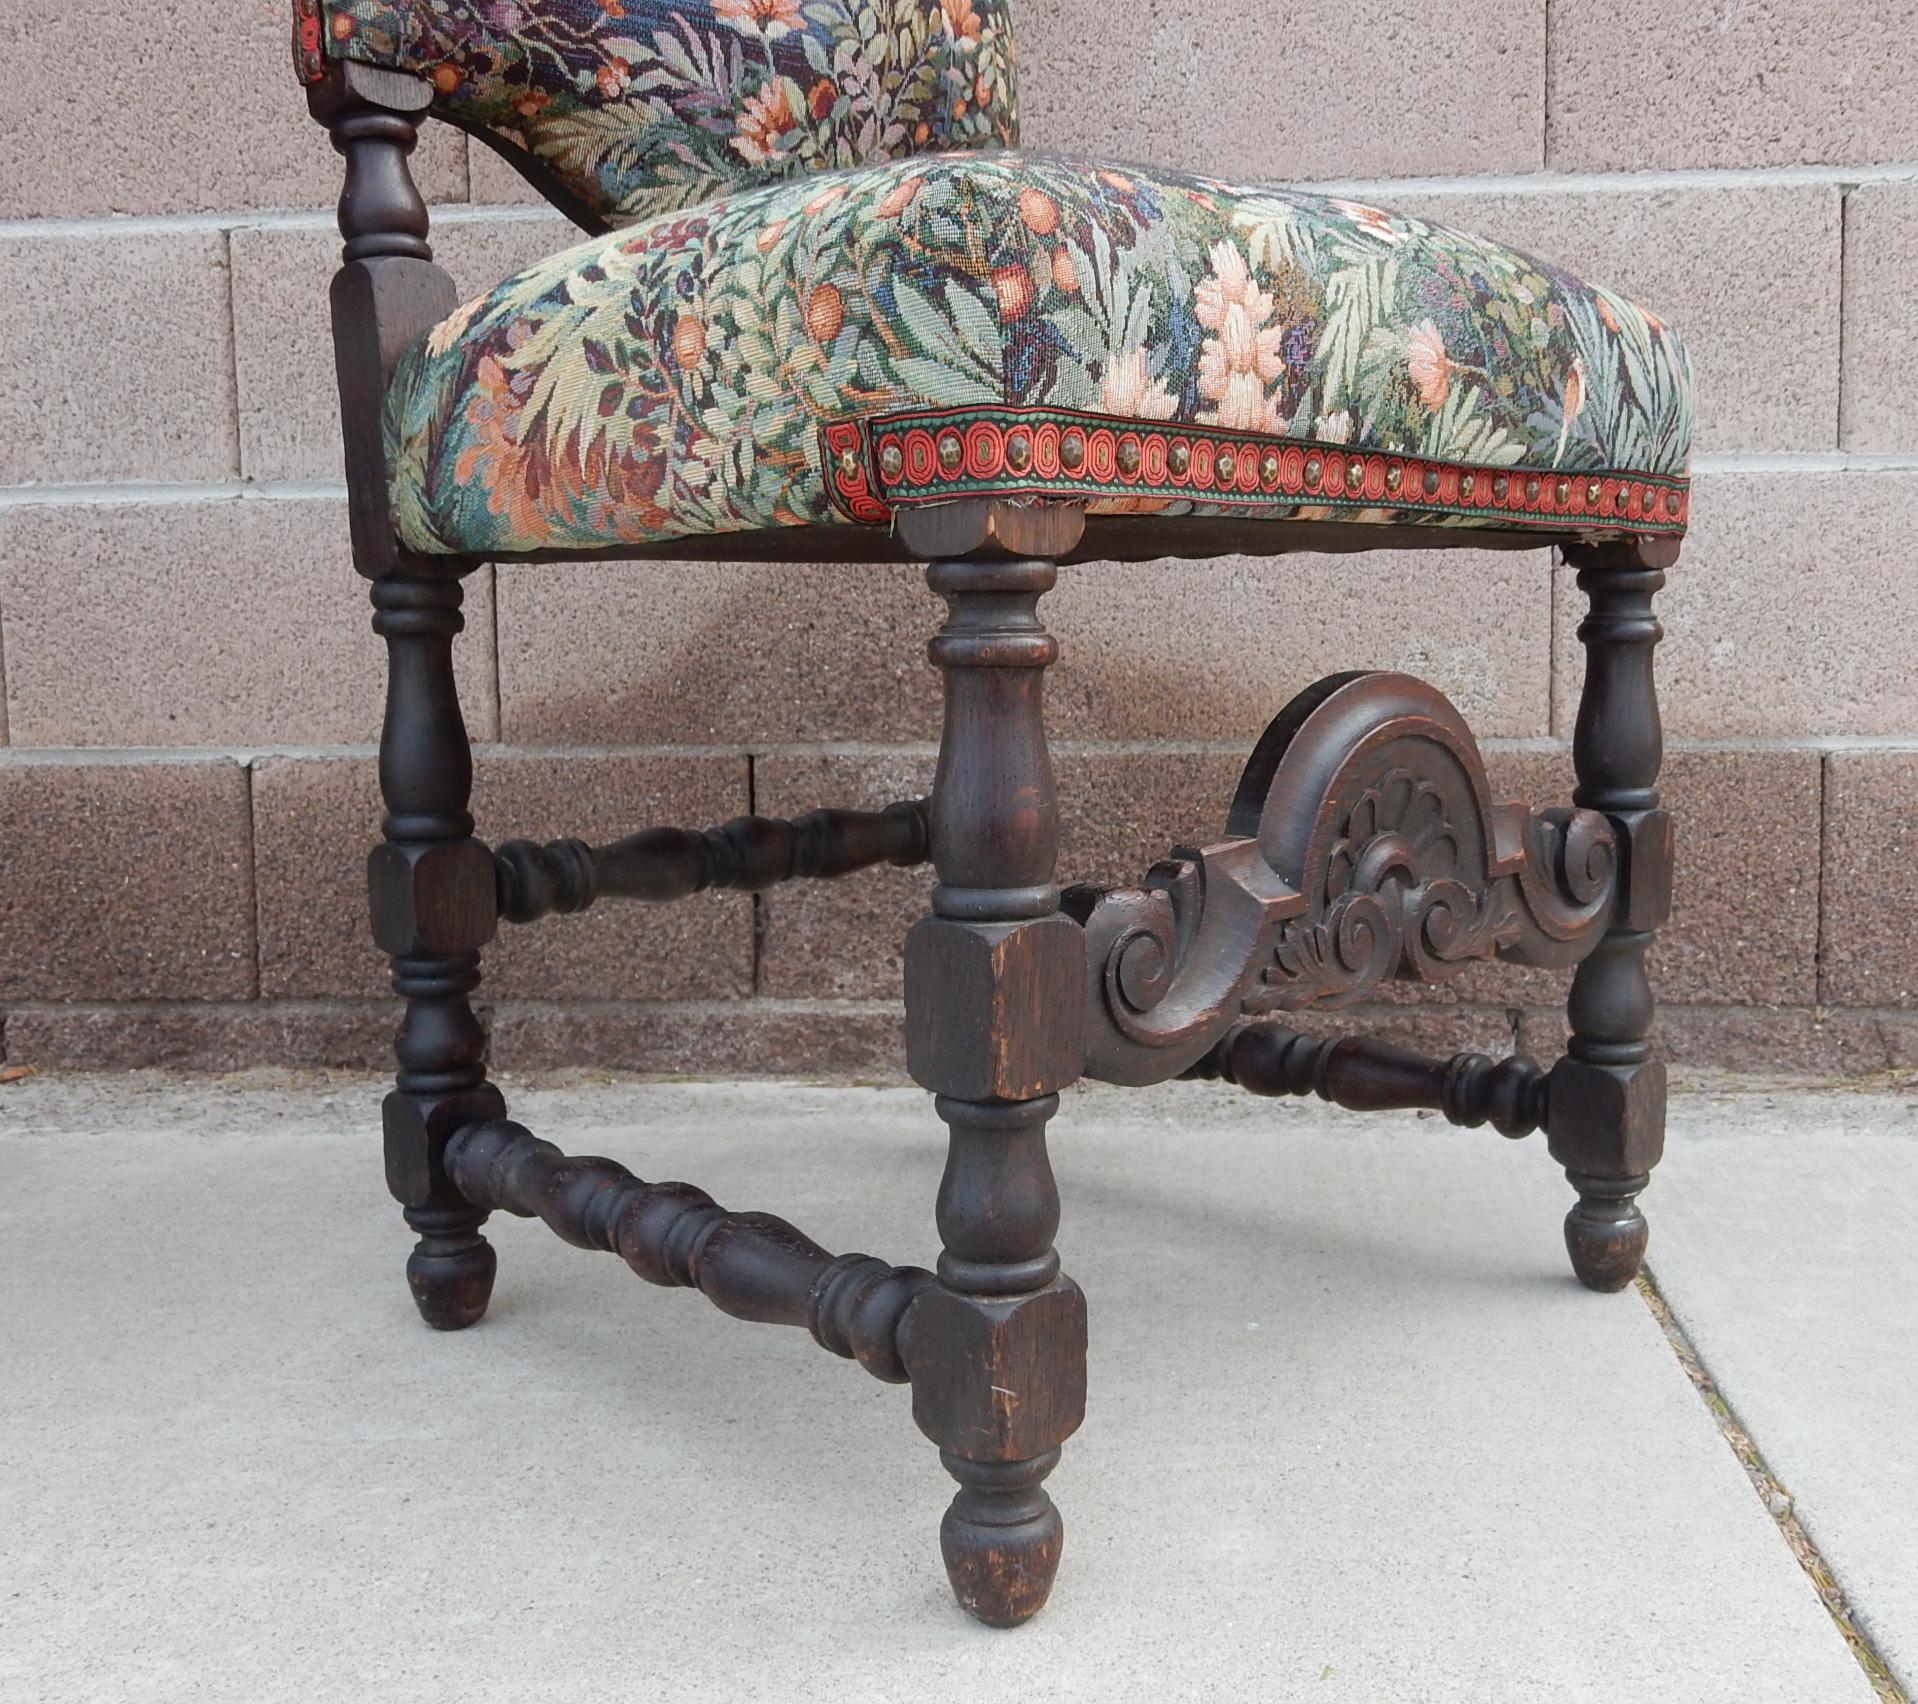 Brass 1940's Spanish Colonial Revival Chairs Dressed in Flamingo Garden Upholstery